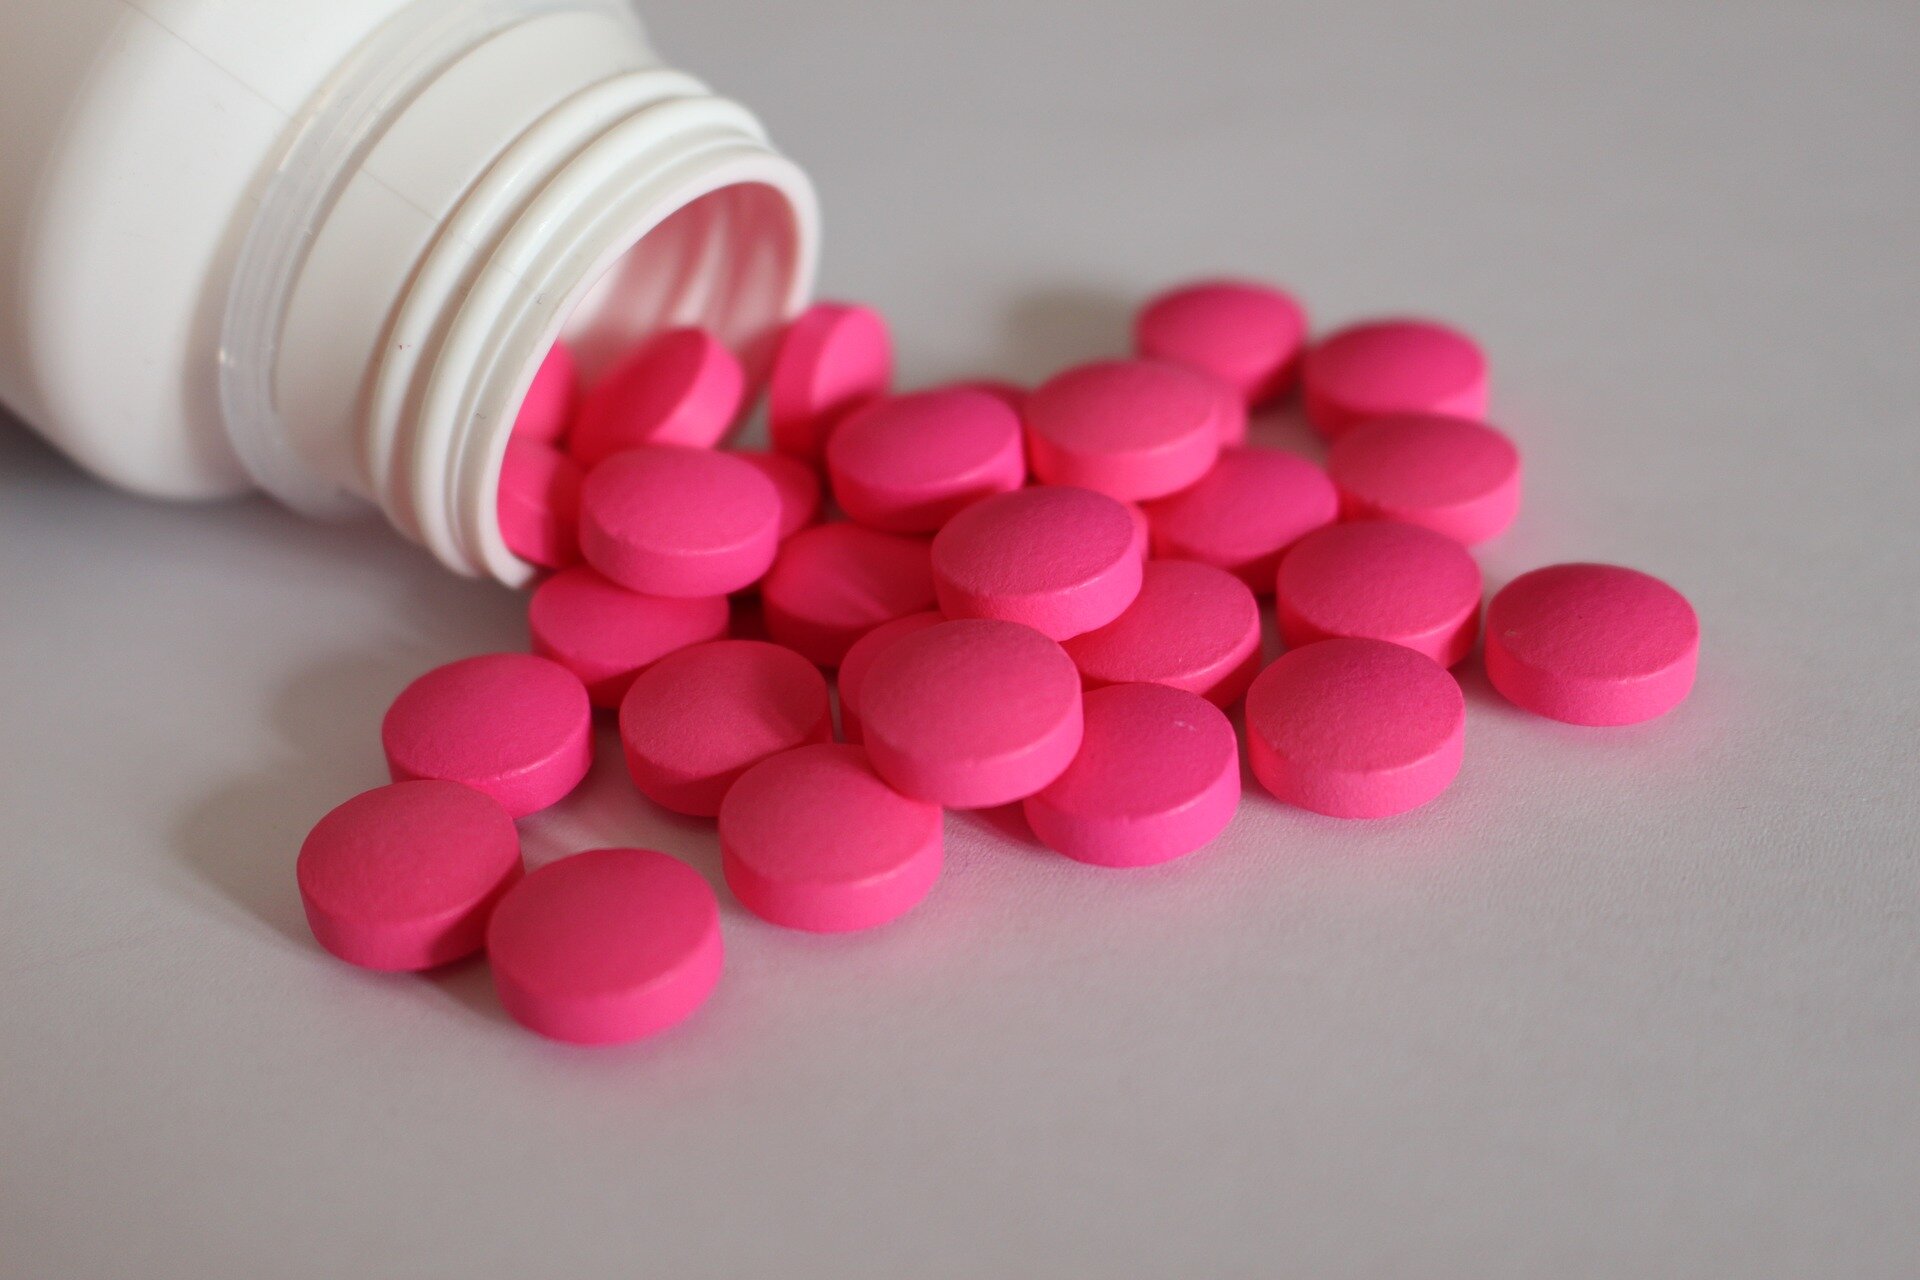 Study finds ibuprofen does not increase risk of death from COVID-19